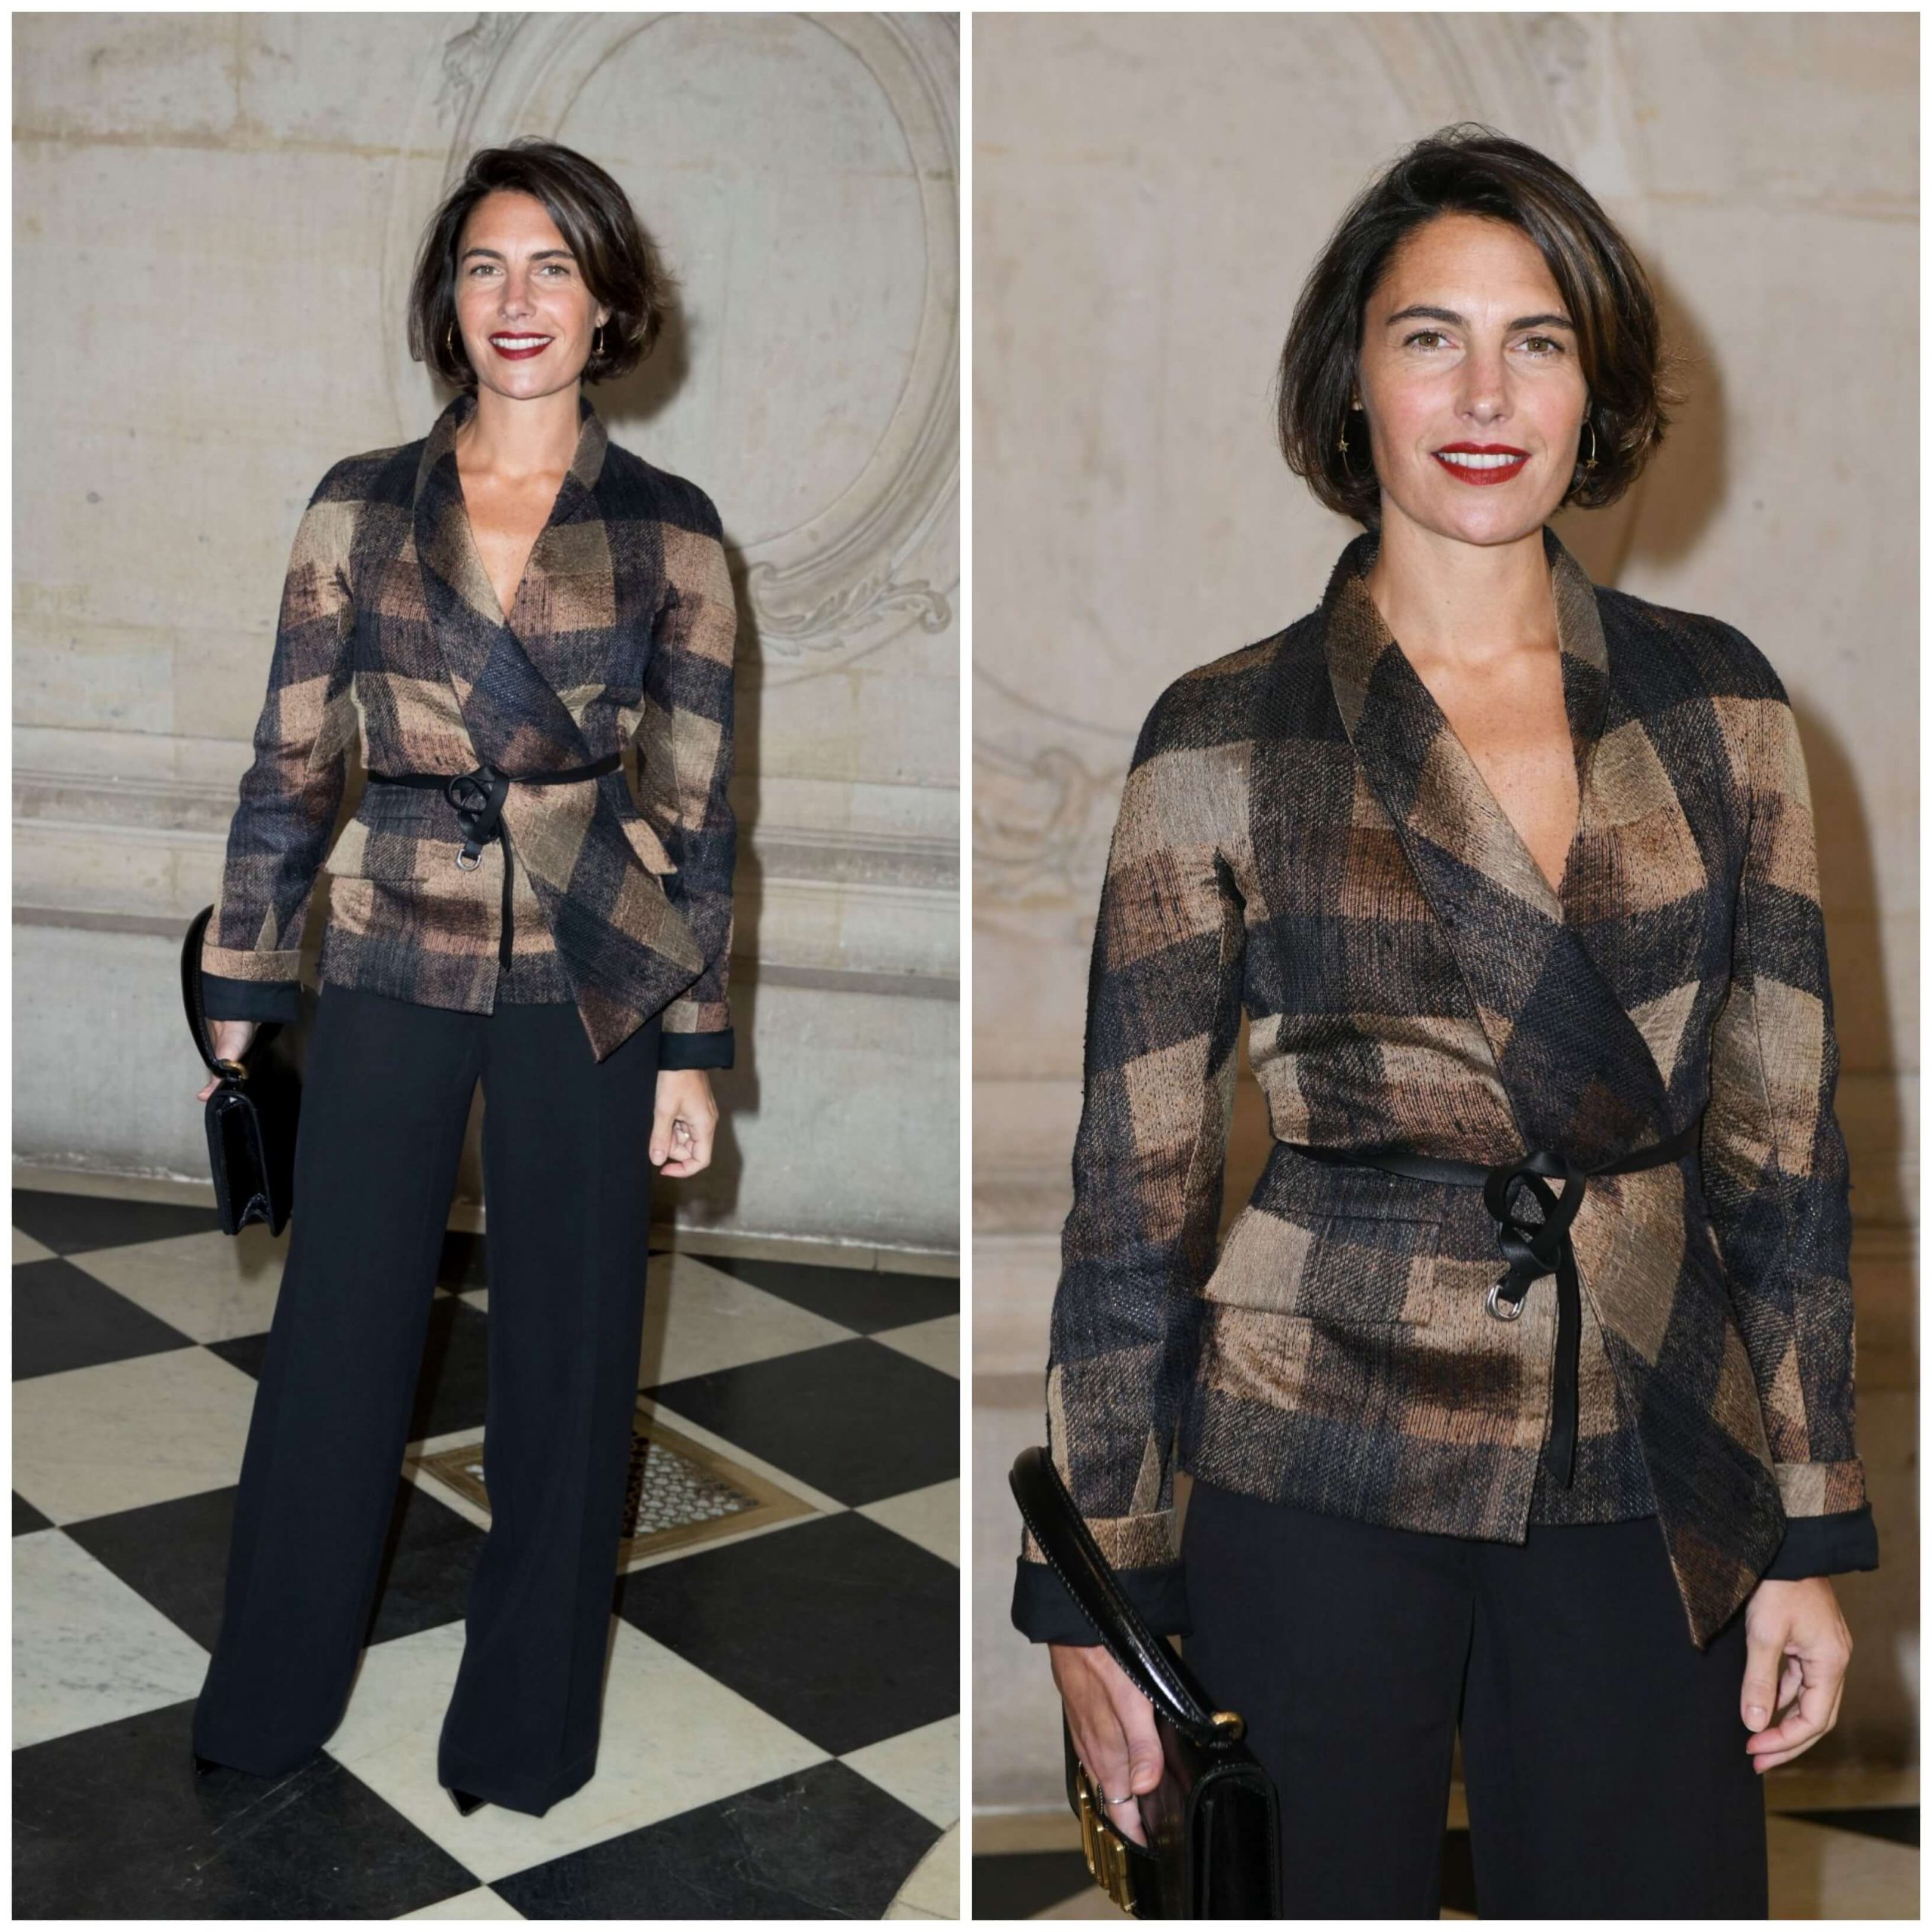 Alessandra Sublet – In Checked Shirt With Pant Christian Dior Paris Fashion Week